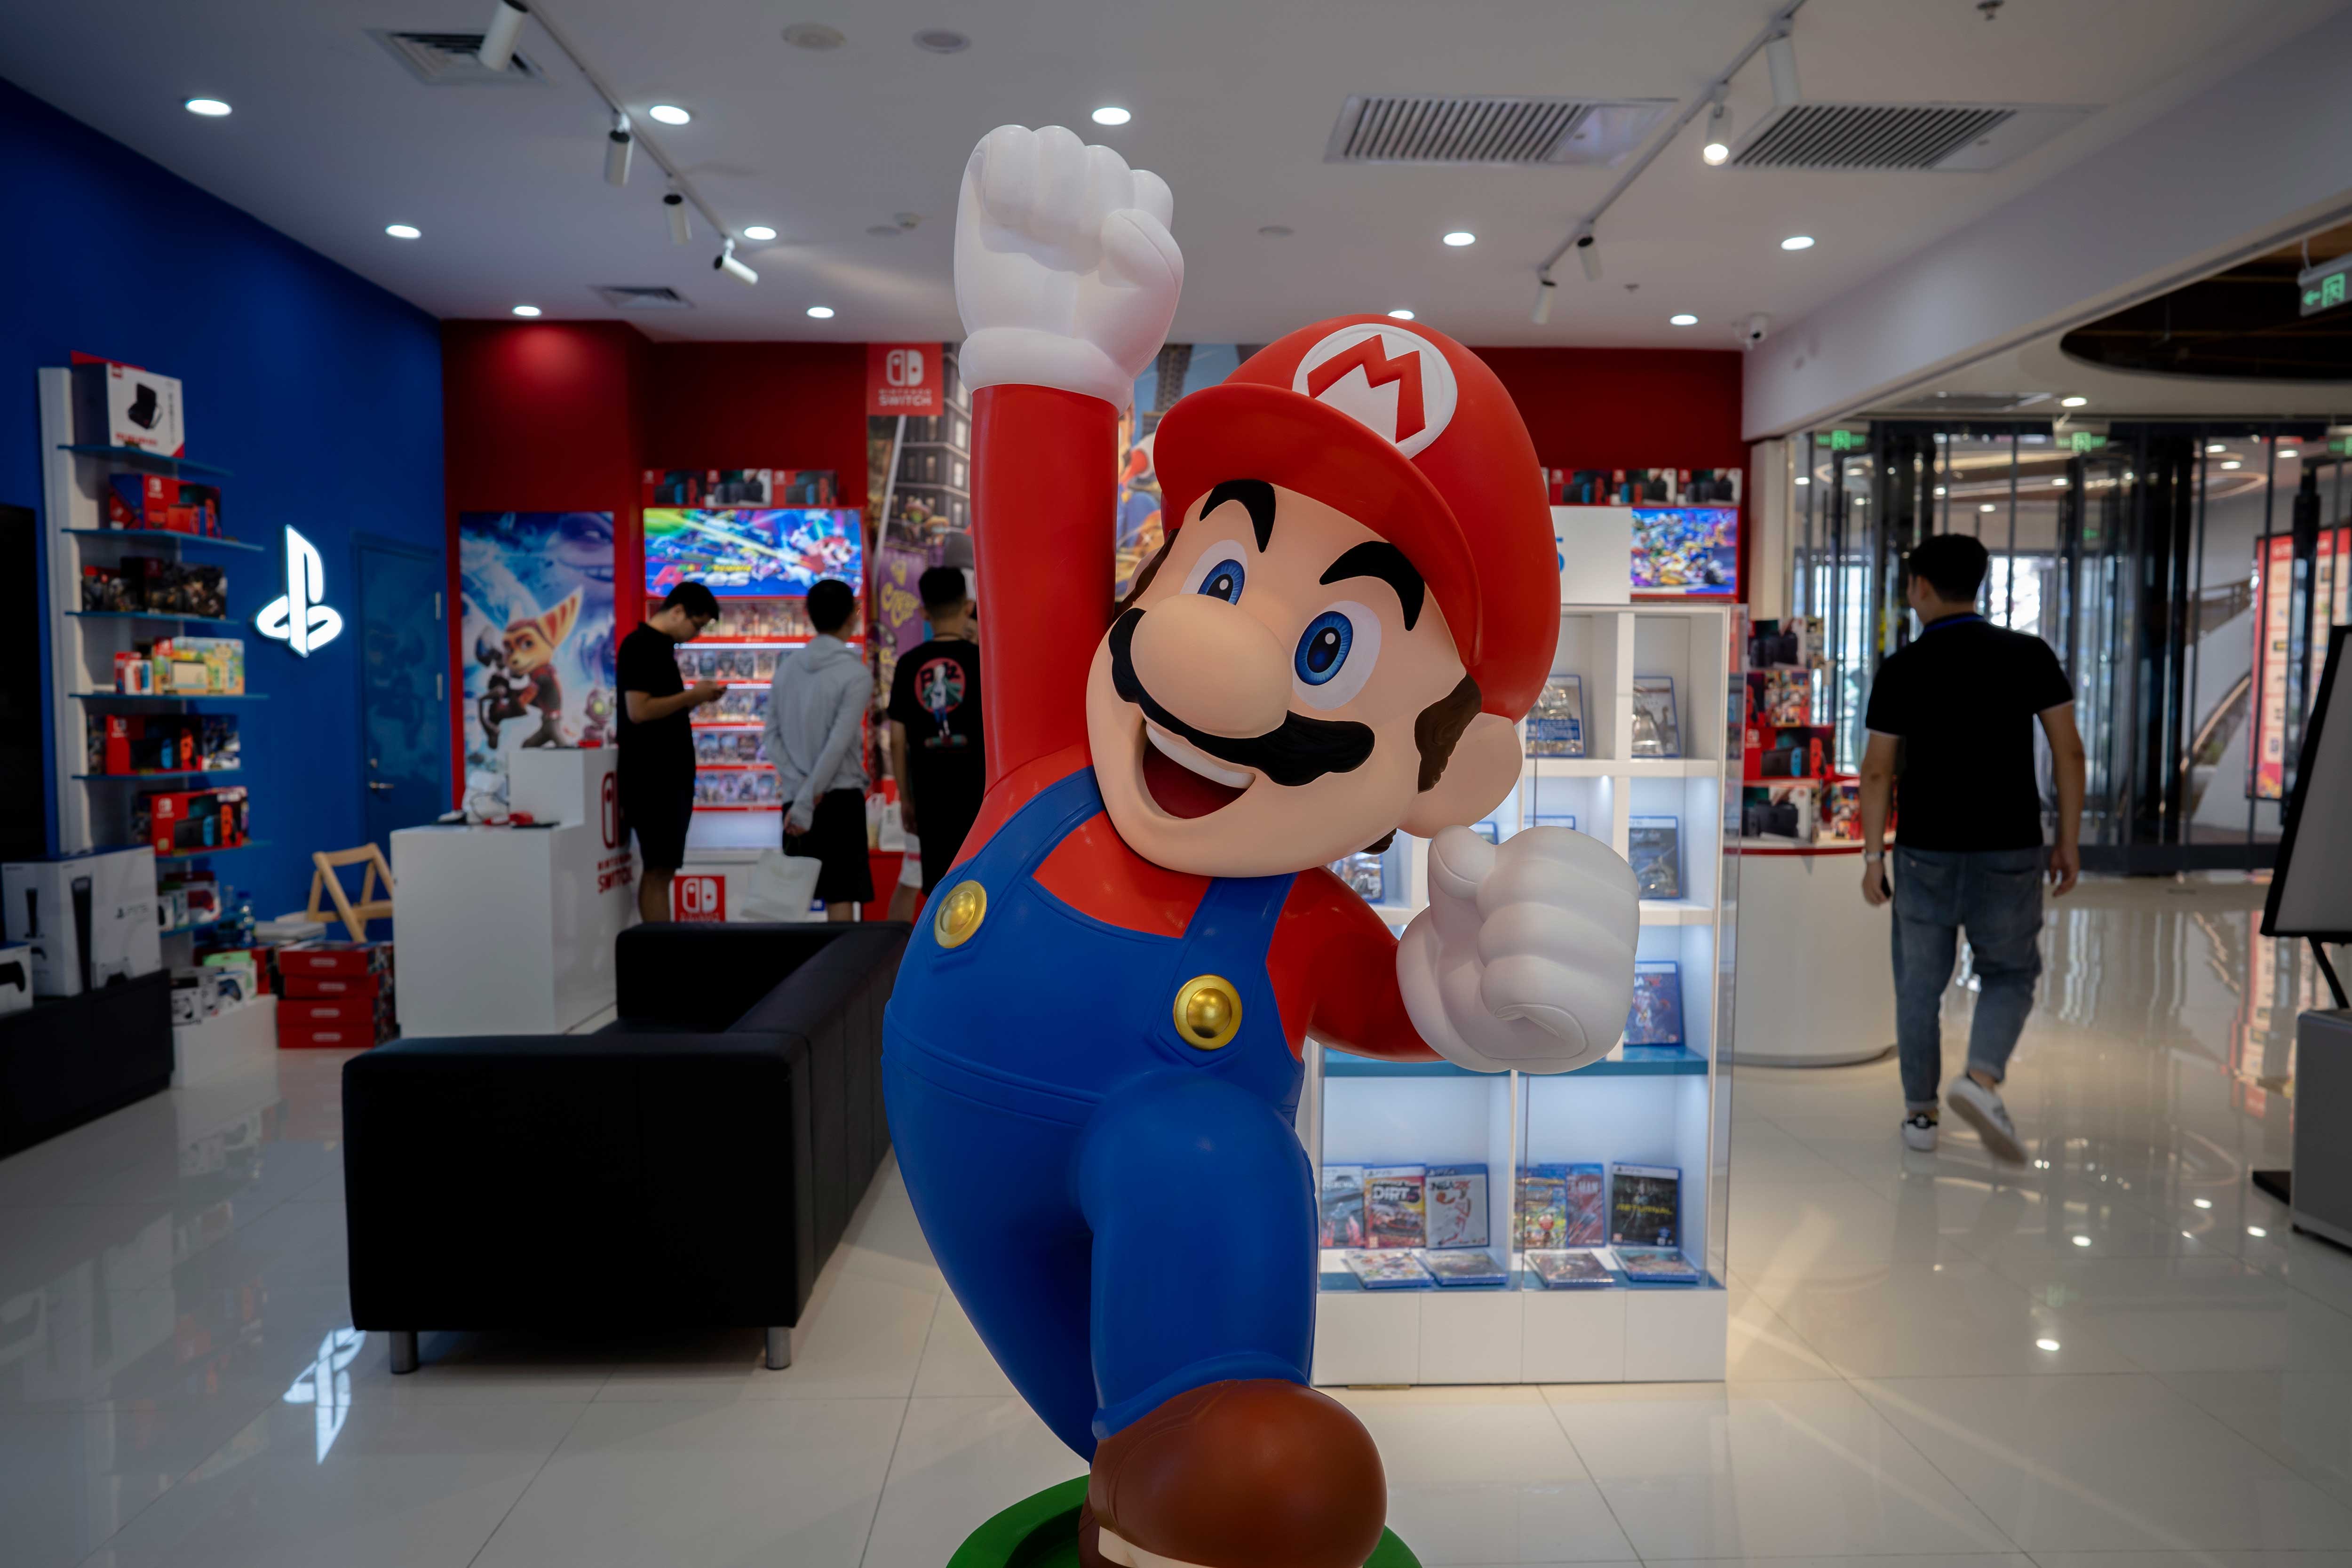 Analysis: Nintendo Bets on TV App to Sell Pricey Wii U